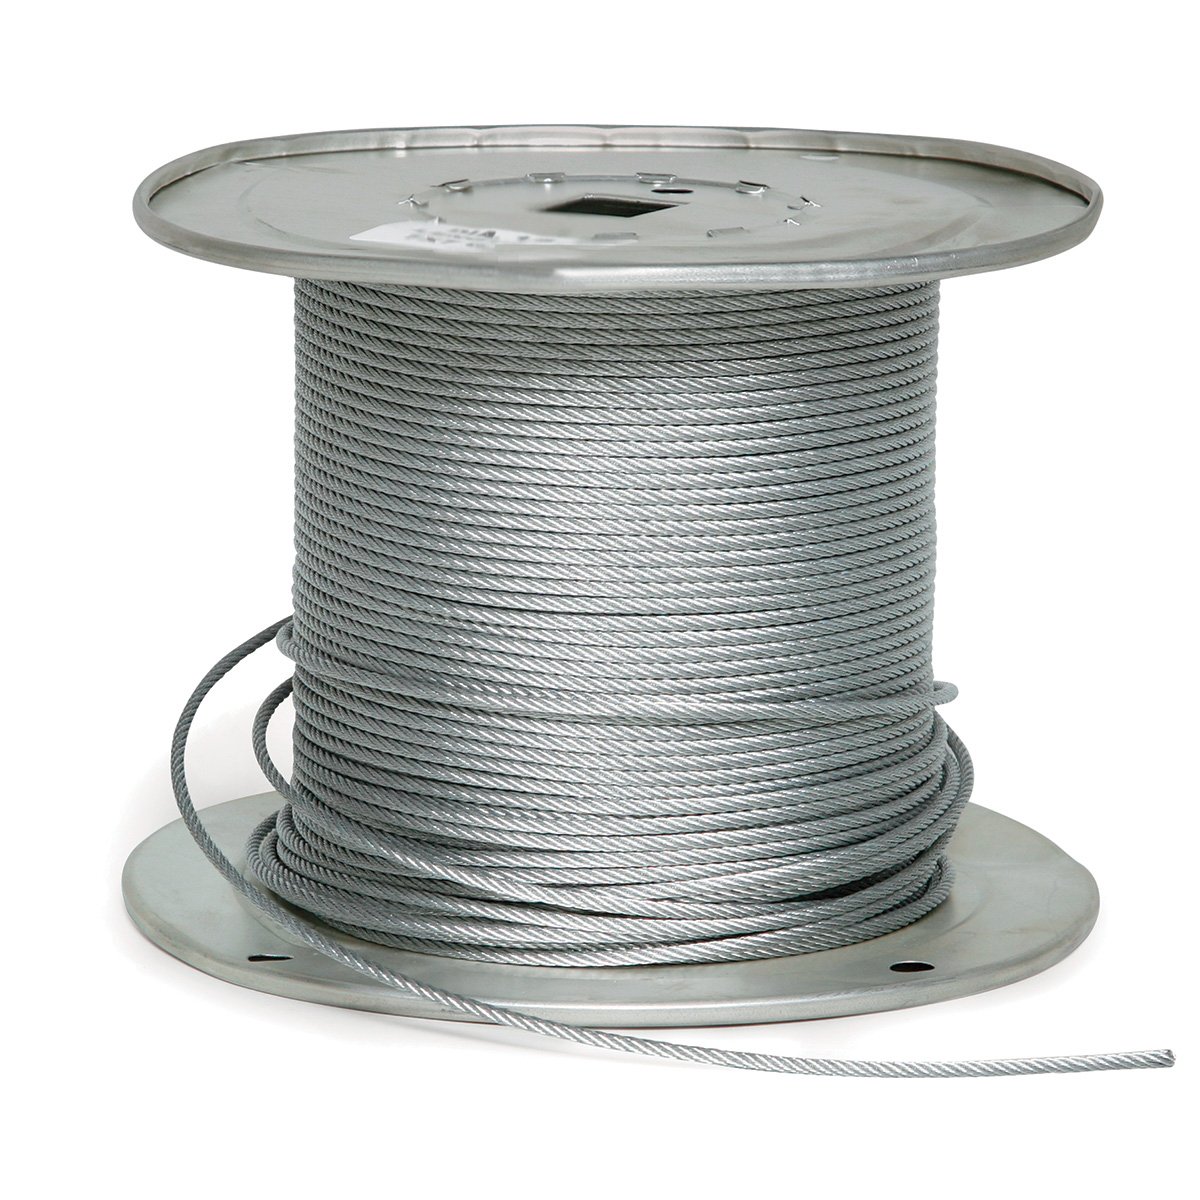 2g9187-00500 0.18 Dia. X 500 Ft. 7 X 19 Galvanized Aircraft Cable